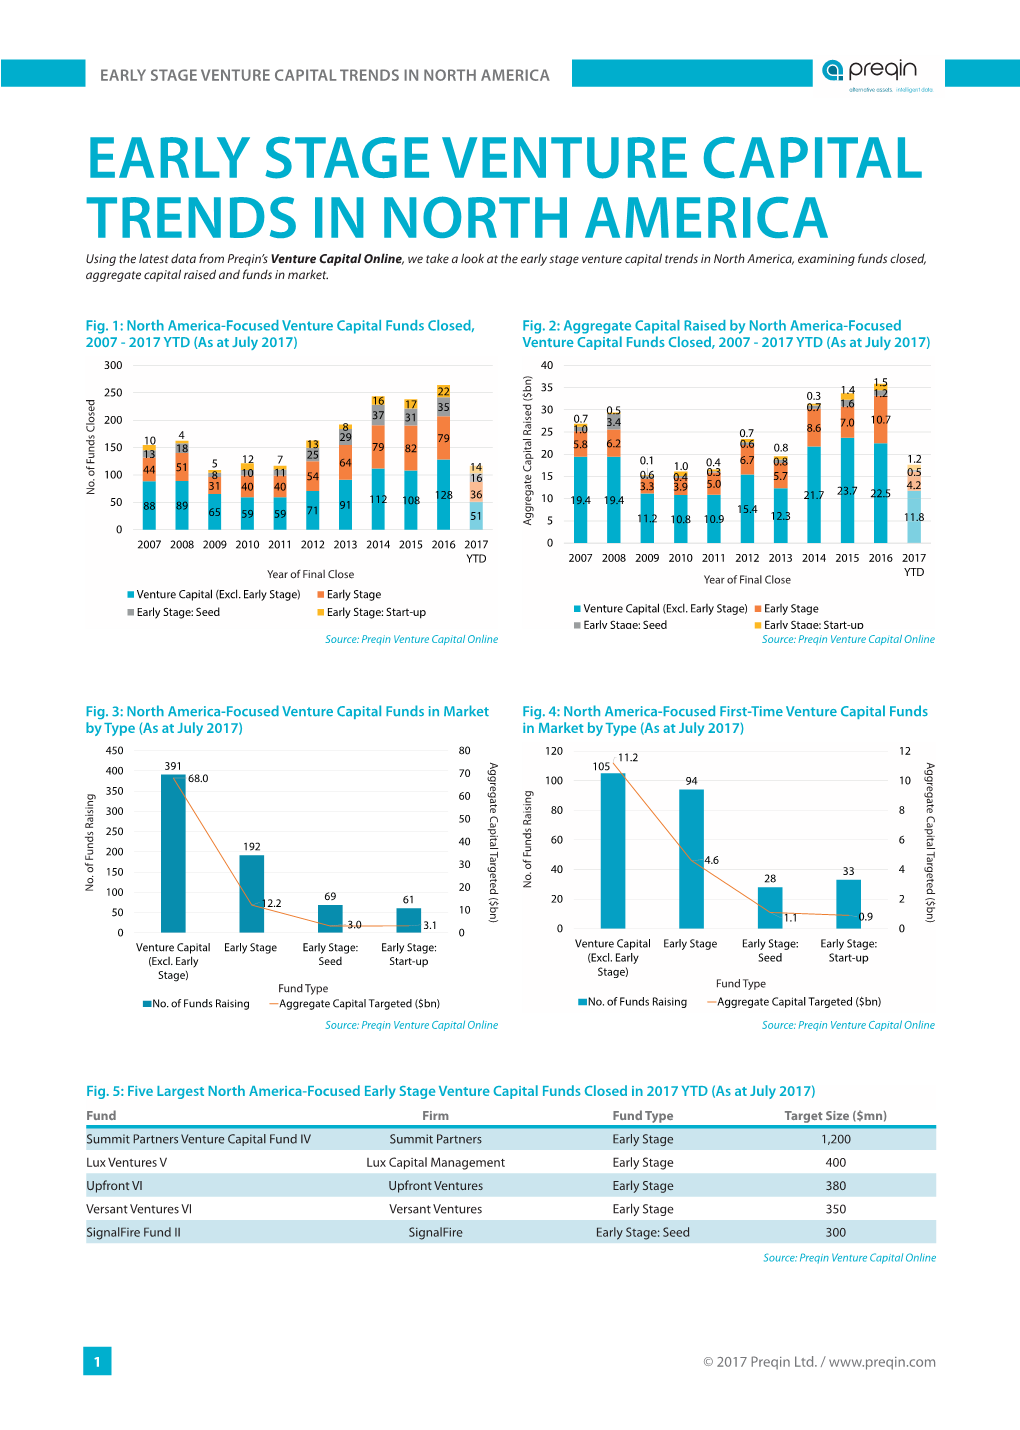 EARLY STAGE VENTURE CAPITAL TRENDS in NORTH AMERICA Alternative Assets